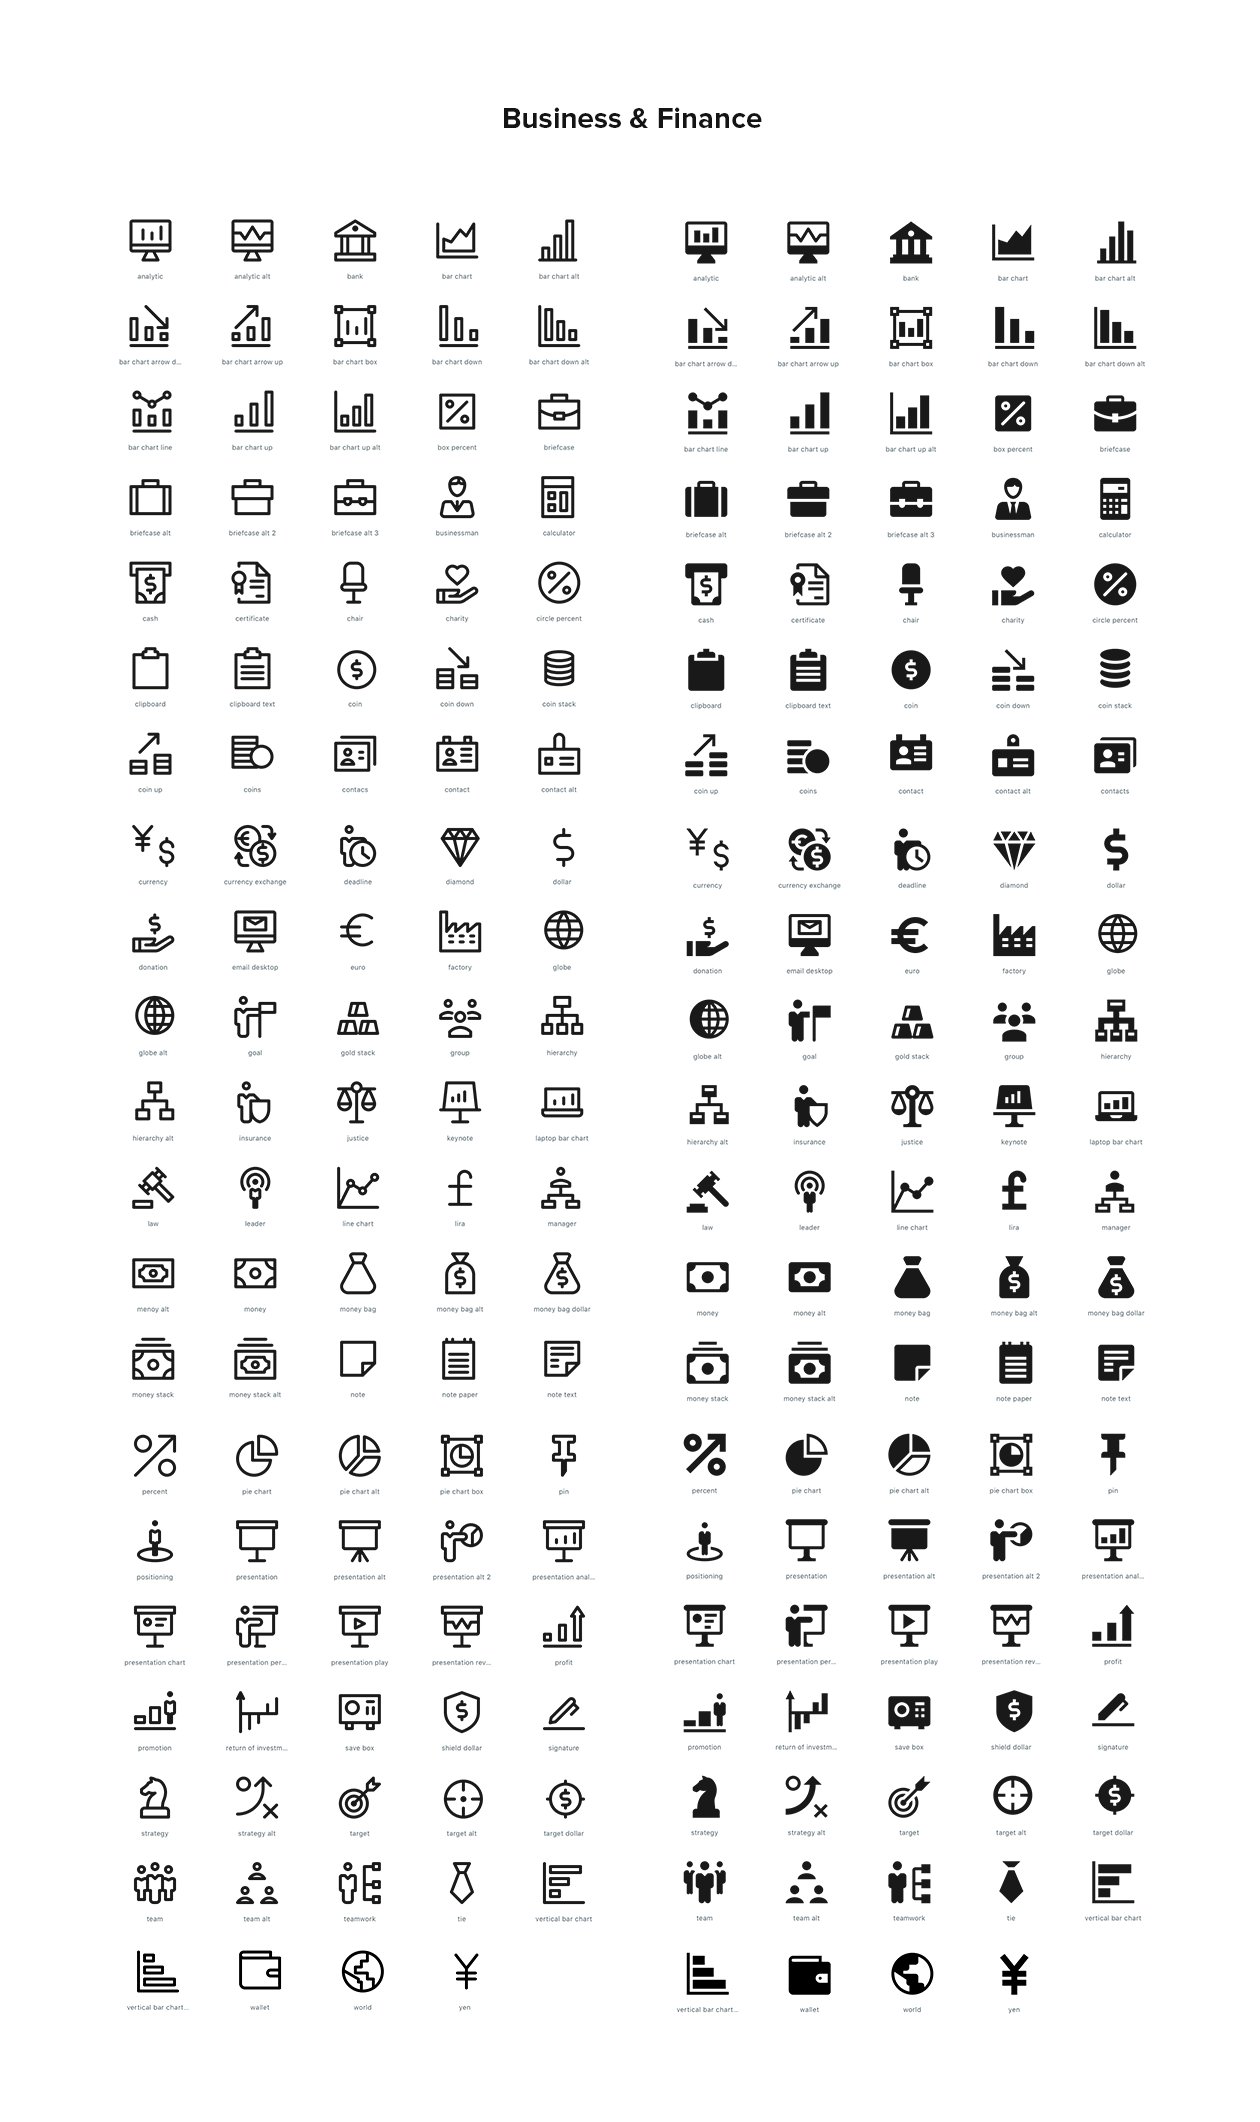 Icons for business and finance.